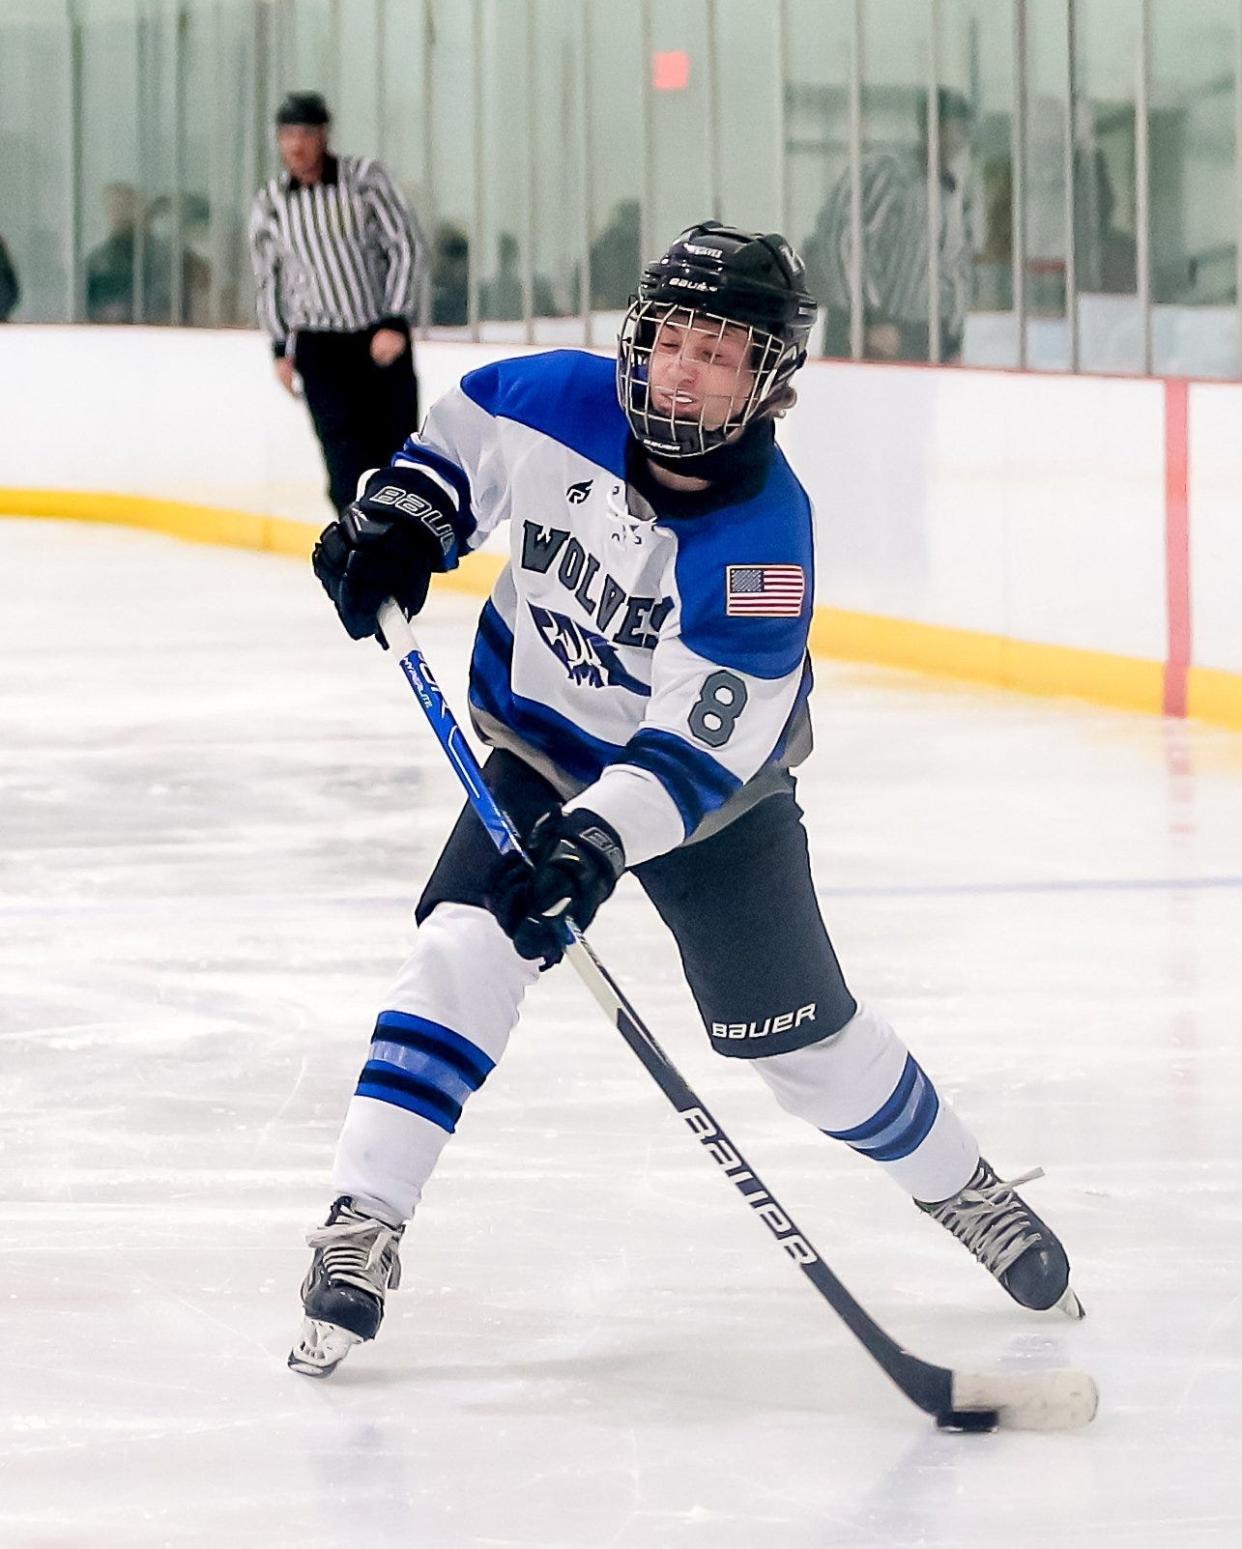 Junior Simon Abbott has helped set the tone for Kilbourne since it returned to varsity play last season. He had 37 goals and a team-leading 43 assists last winter. This year, he led the Wolves with 28 goals and 21 assists through 21 games.